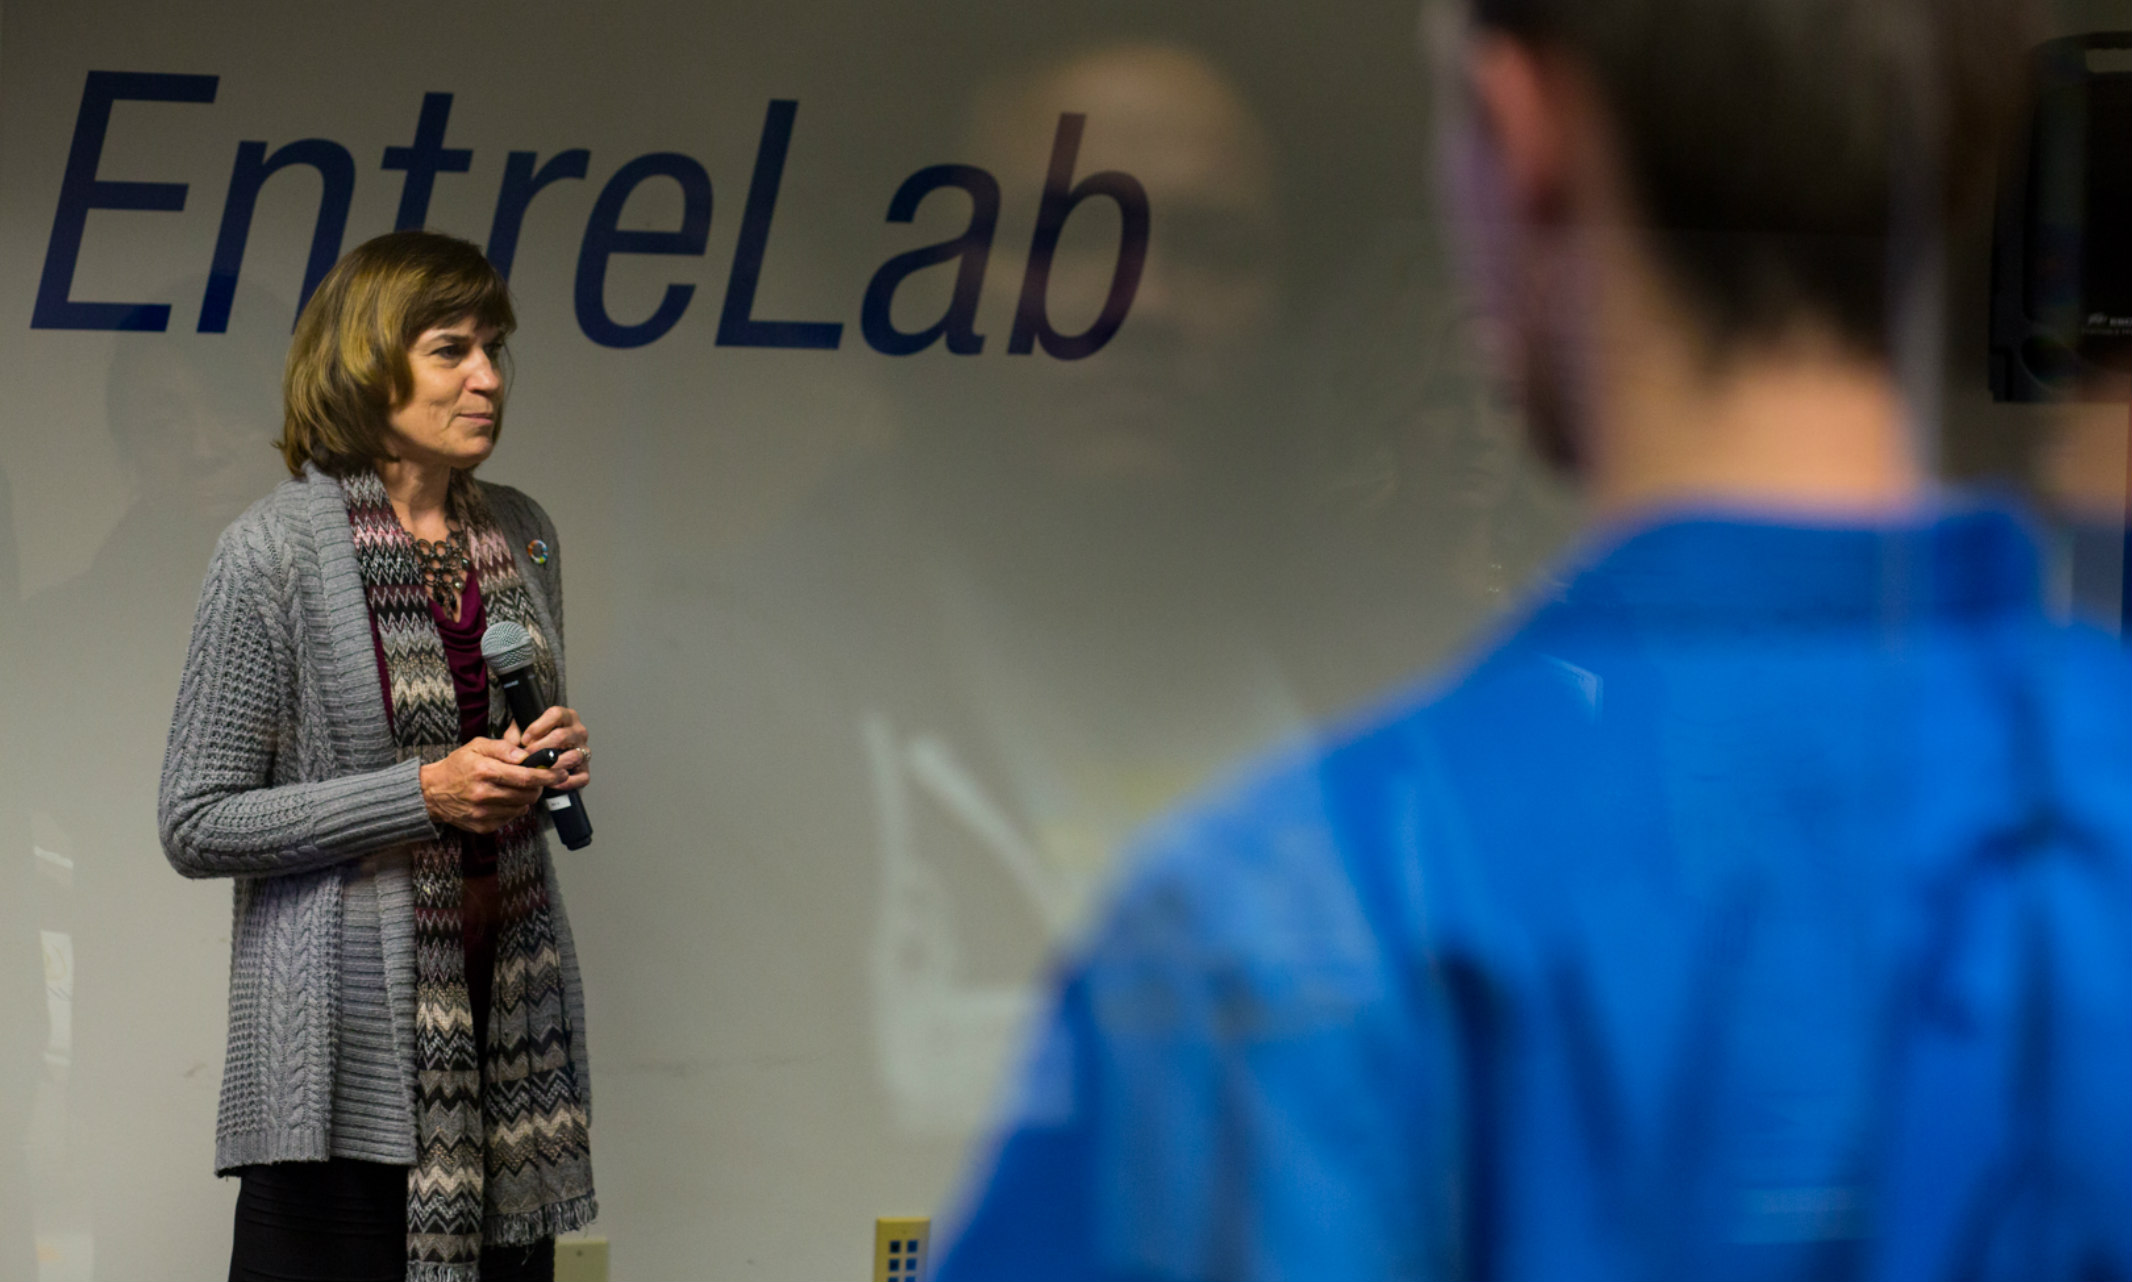 Maria Meyers, executive director of the UMKC Innovation Center, talks at an event.